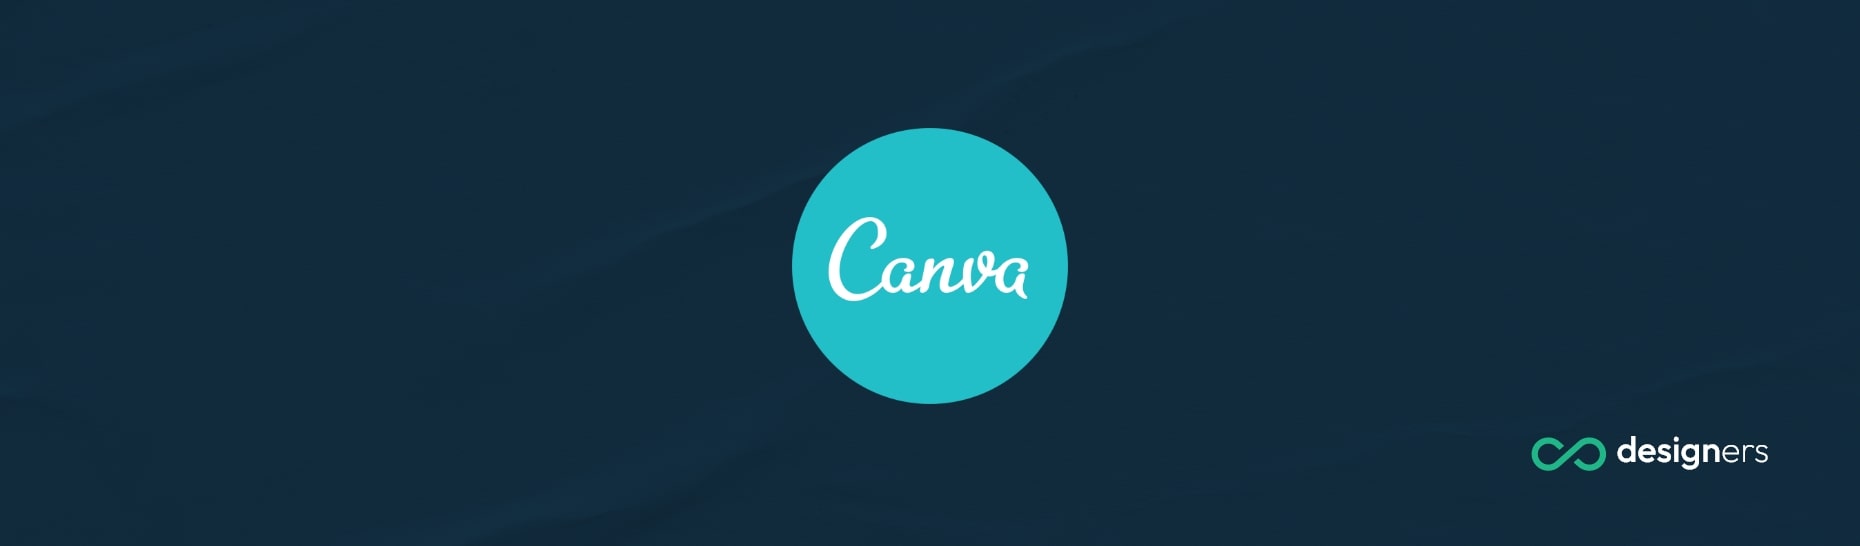 Where Does Canva Get Their Images?